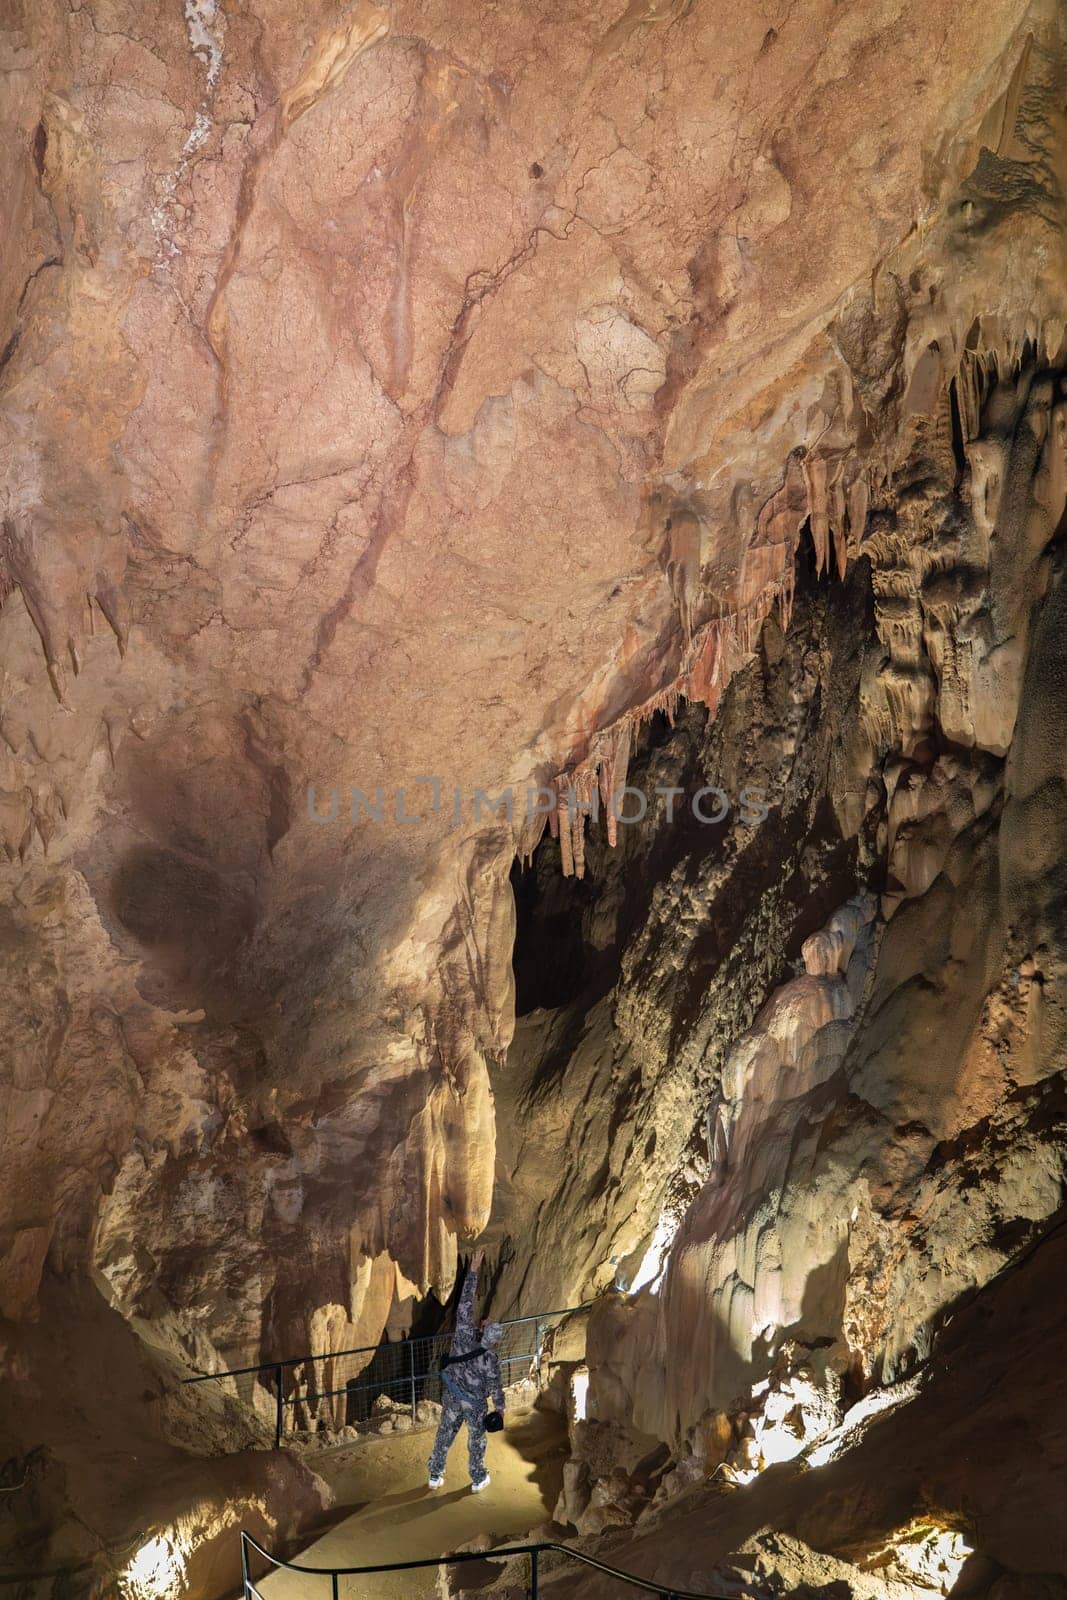 A man is walking through a cave with a large rock ceiling. The cave is dark and the man is holding a flashlight